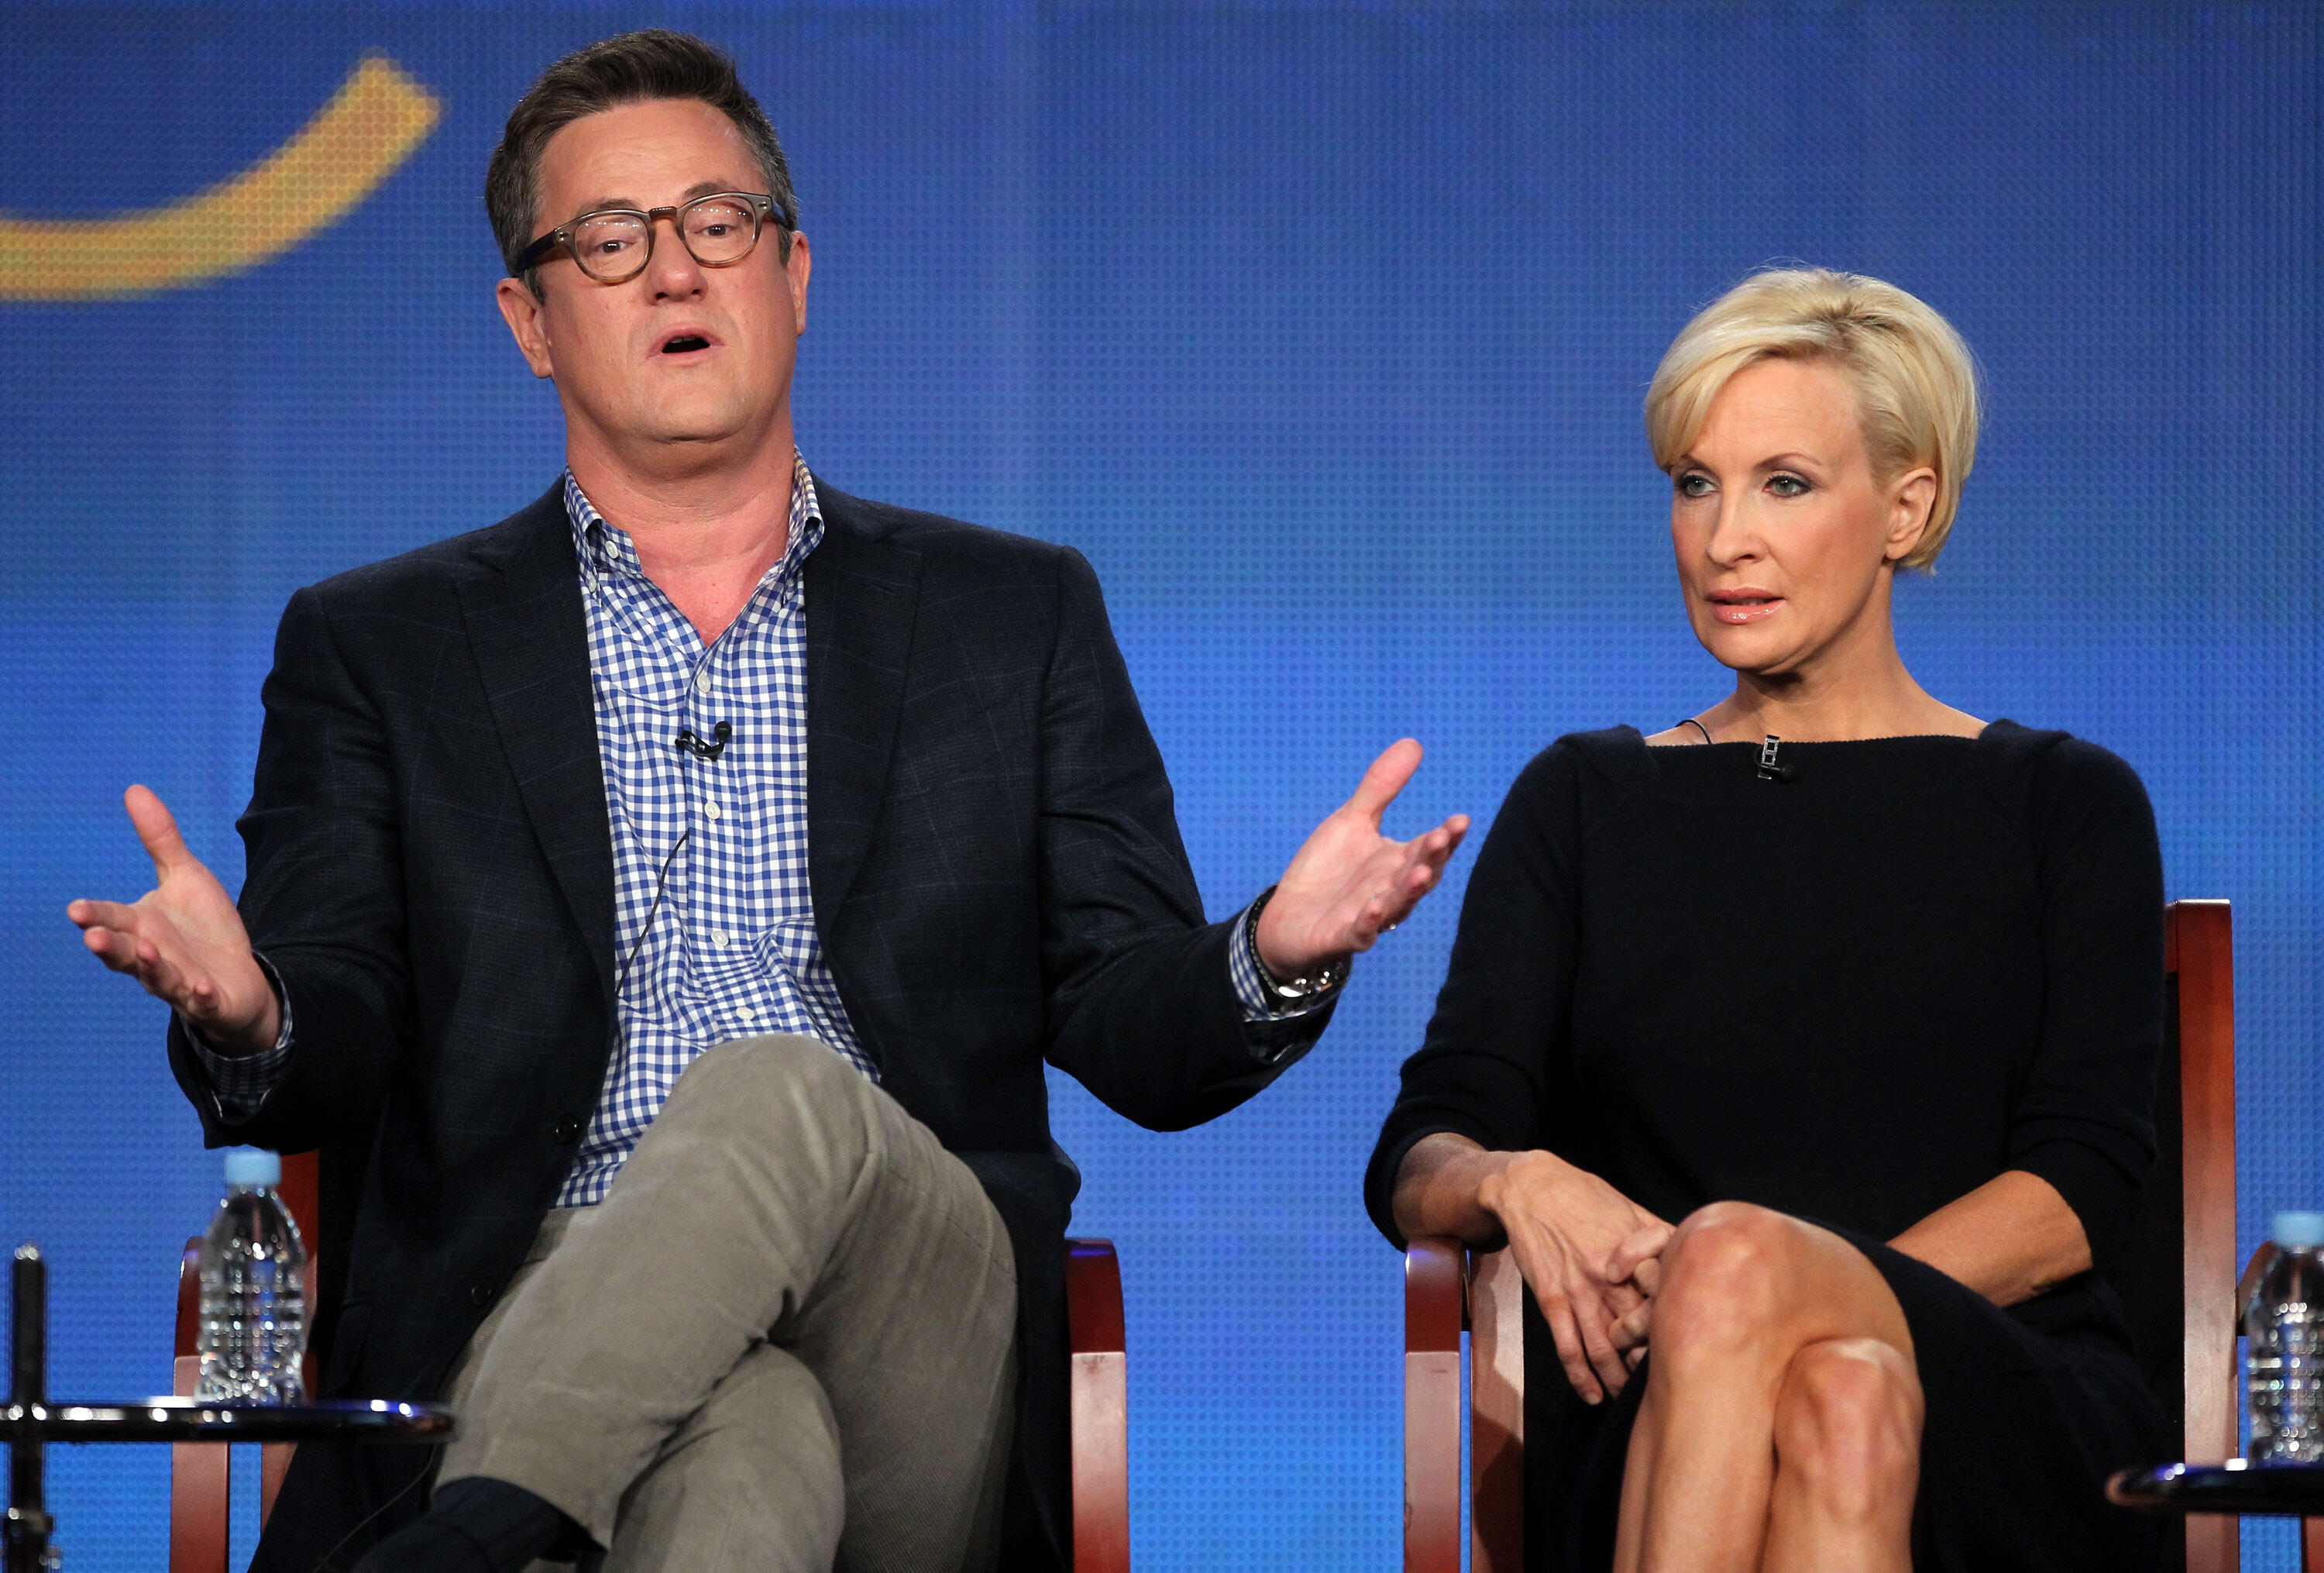 PASADENA, CA - JANUARY 07:  (L-R) Host Joe Scarborough and co-host Mika Brzezinski speak onstage during the 'Morning Joe' panel during the NBCUniversal portion of the 2012 Winter TCA Tour at The Langham Huntington Hotel and Spa on January 7, 2012 in Pasad